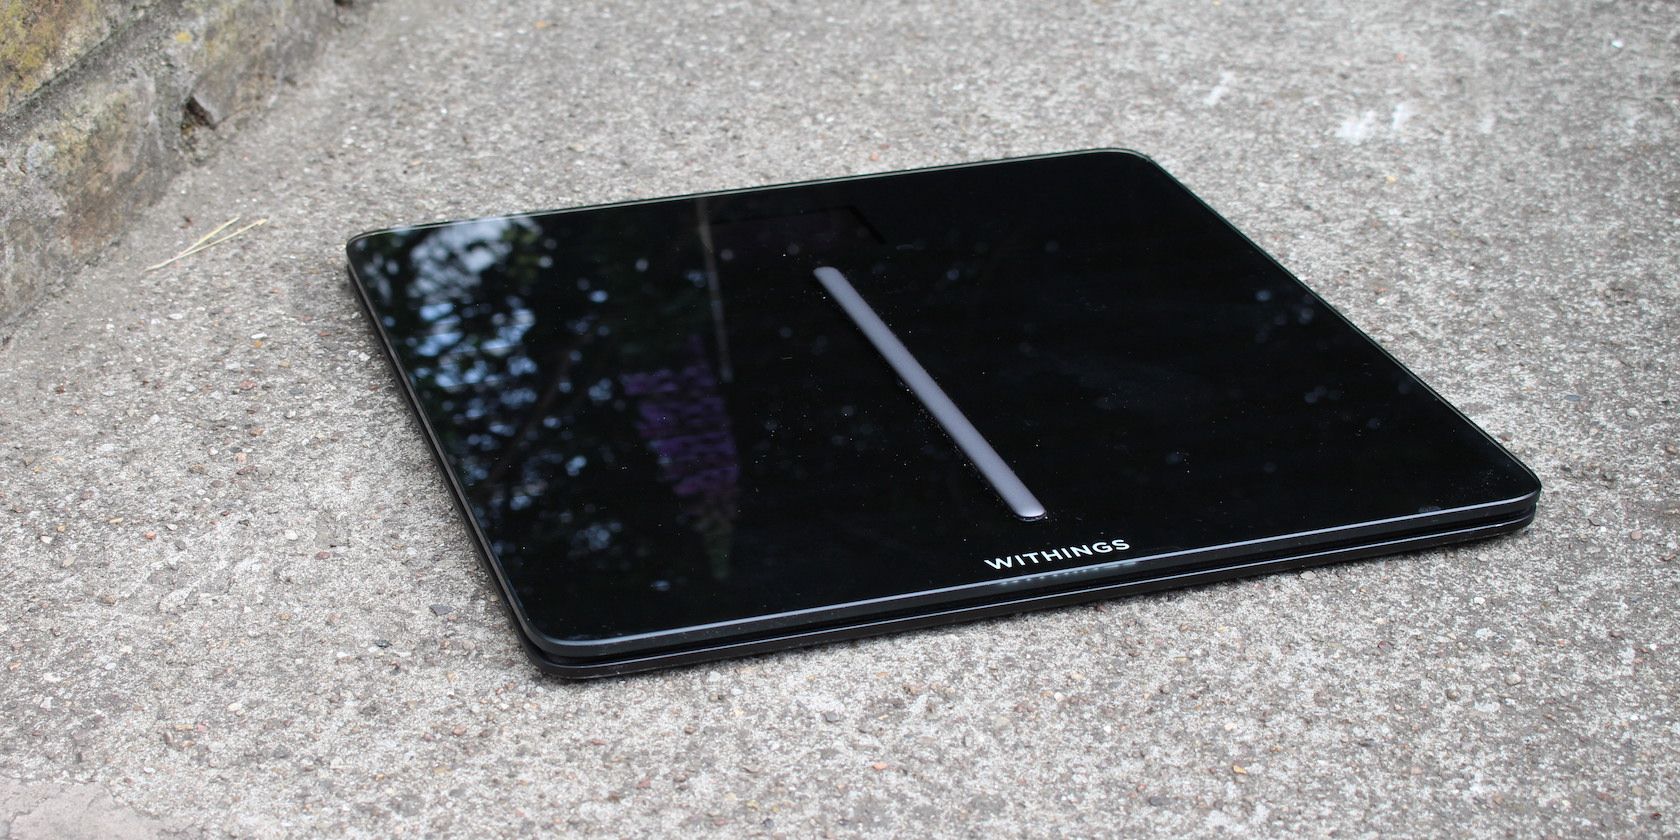 Withings Body Cardio Scale review: Withings Body Cardio is a smart